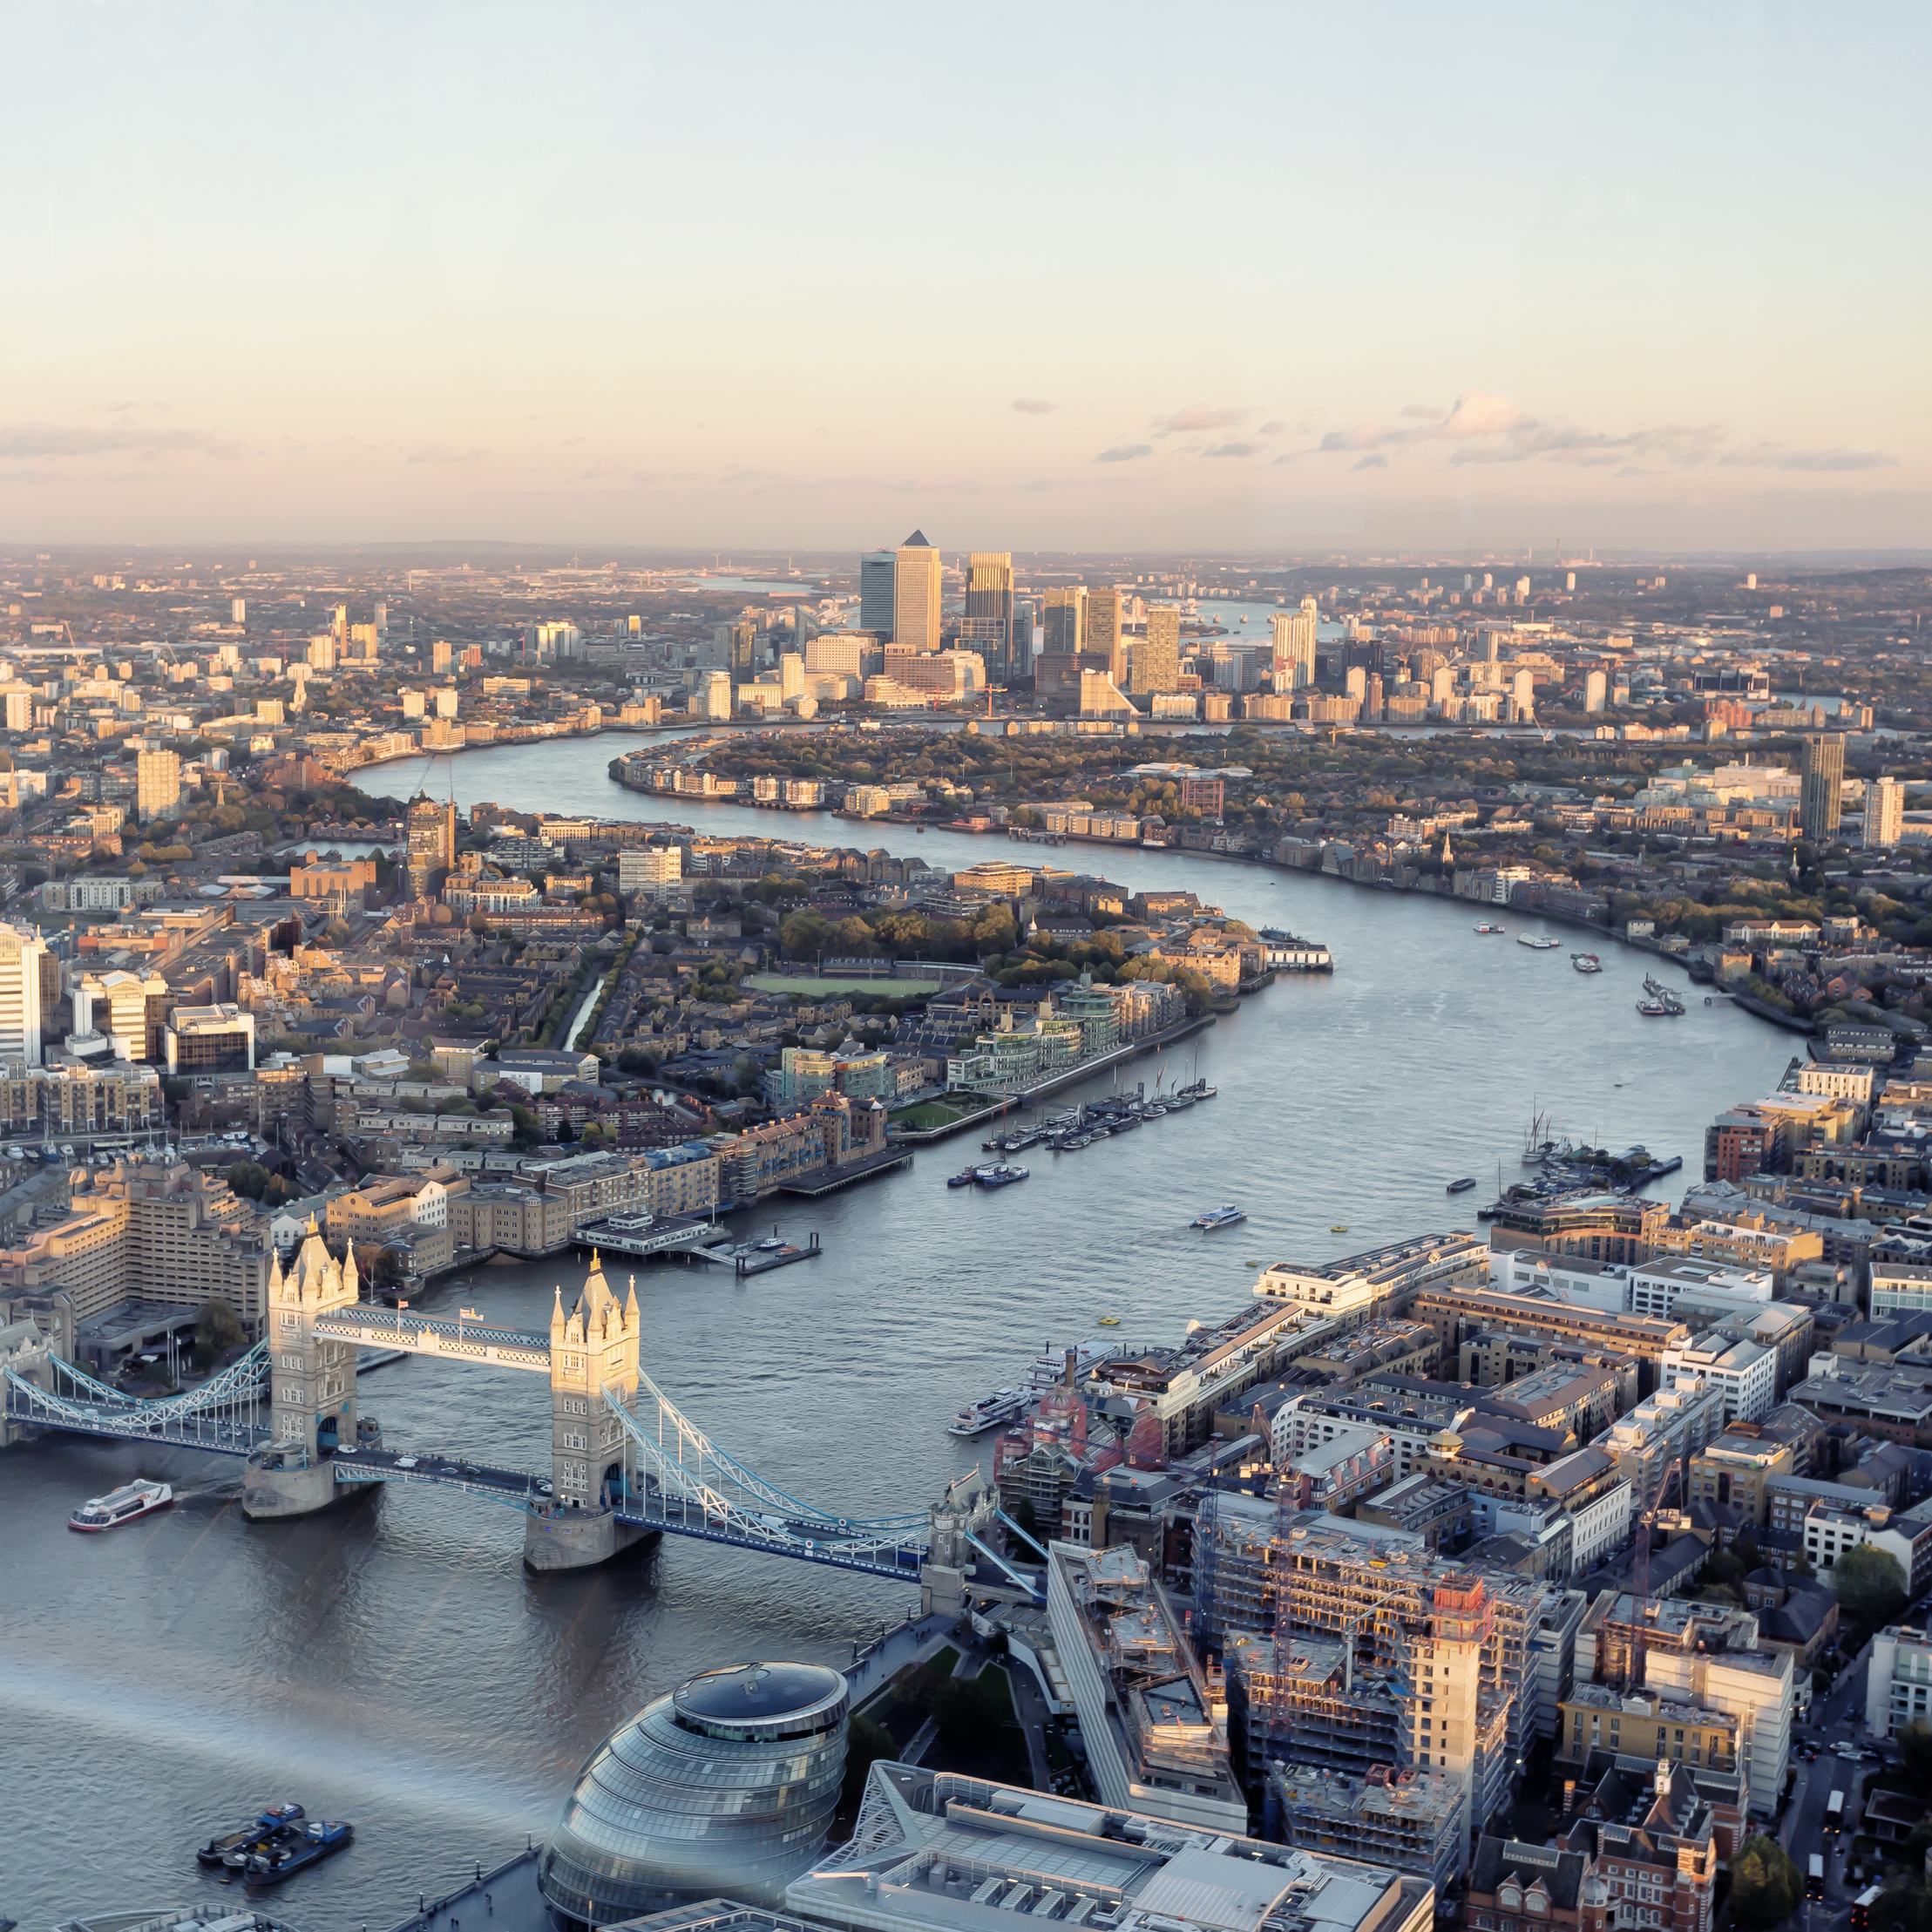 The Thames River London house prices